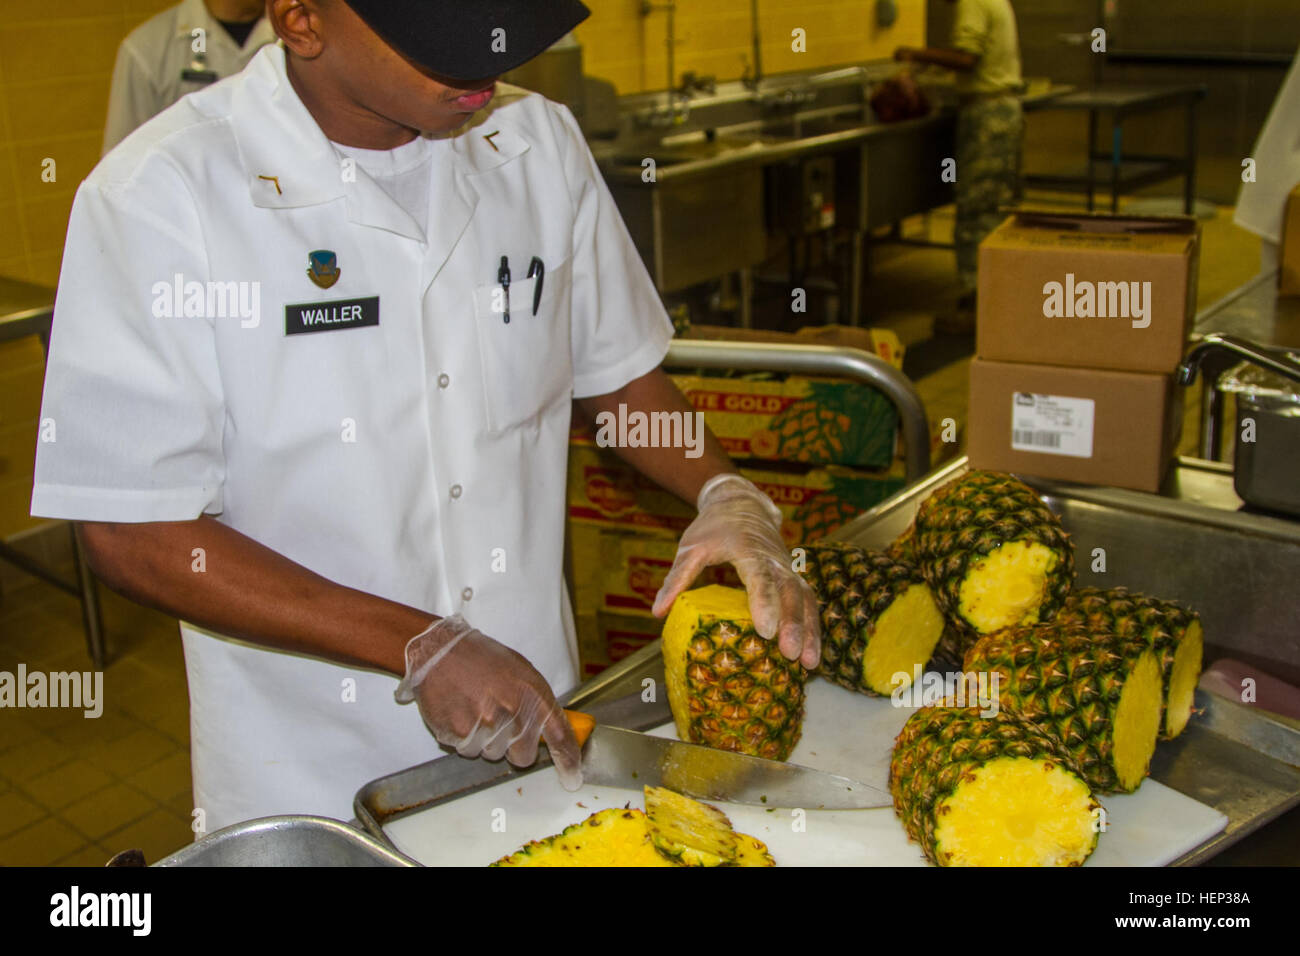 A Soldier who works at the Talon Cafe cuts a fresh pineapple for the Salad bar Jan. 23, 2015 at a dining facility on Camp Humphreys. Fueling Soldiers 150122-A-TU438-163 Stock Photo